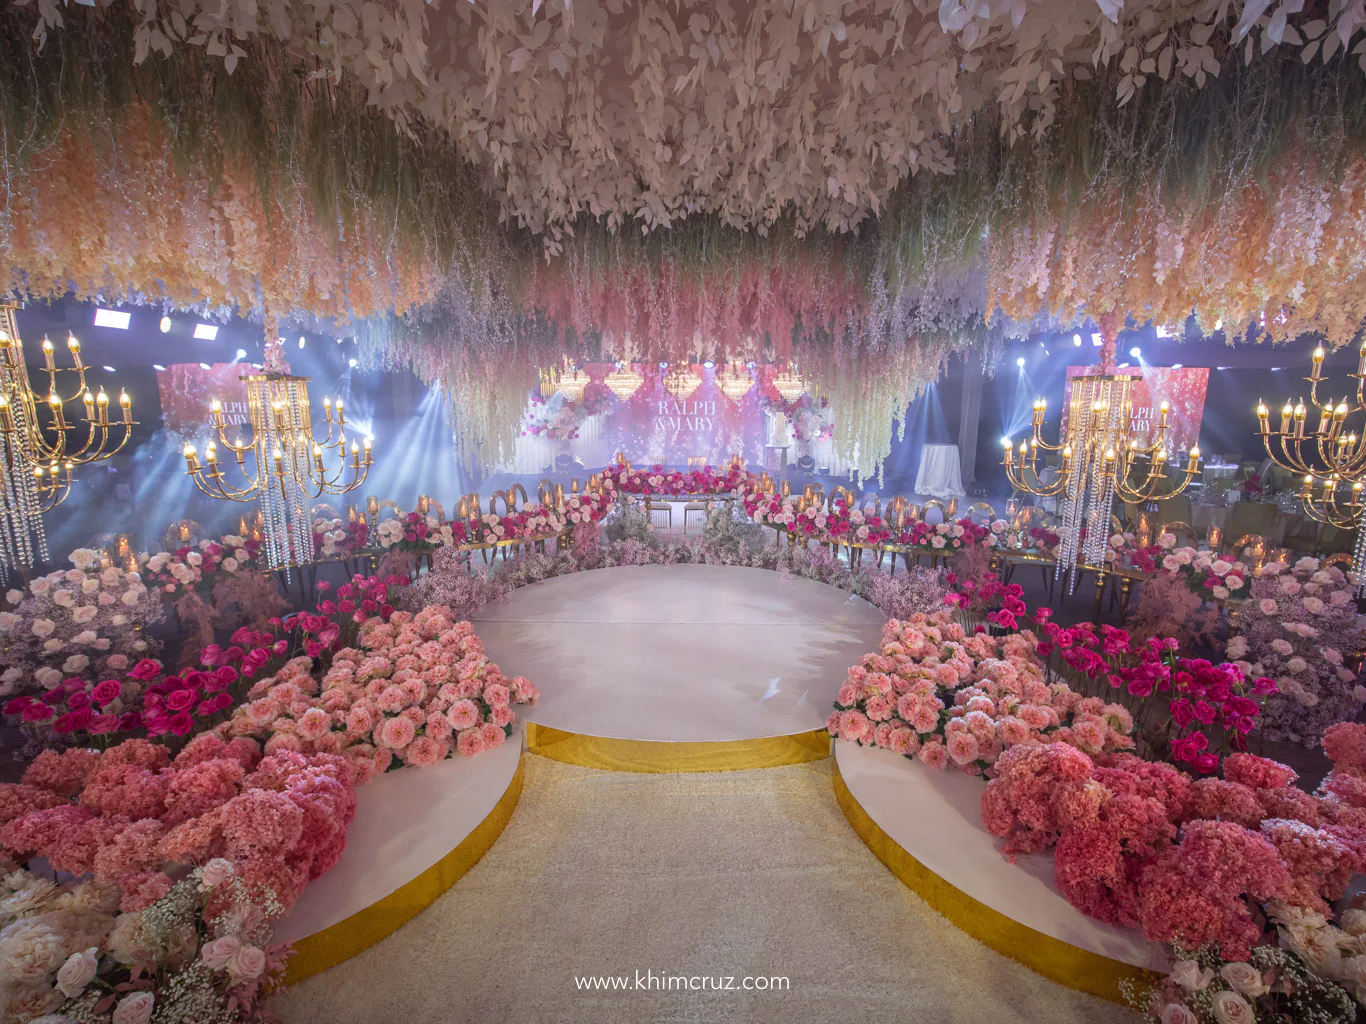 dreamy pink hues floral arrangement for the dance floor and head tables at the wedding reception of Ralph & Mary designed by Khim Cruz